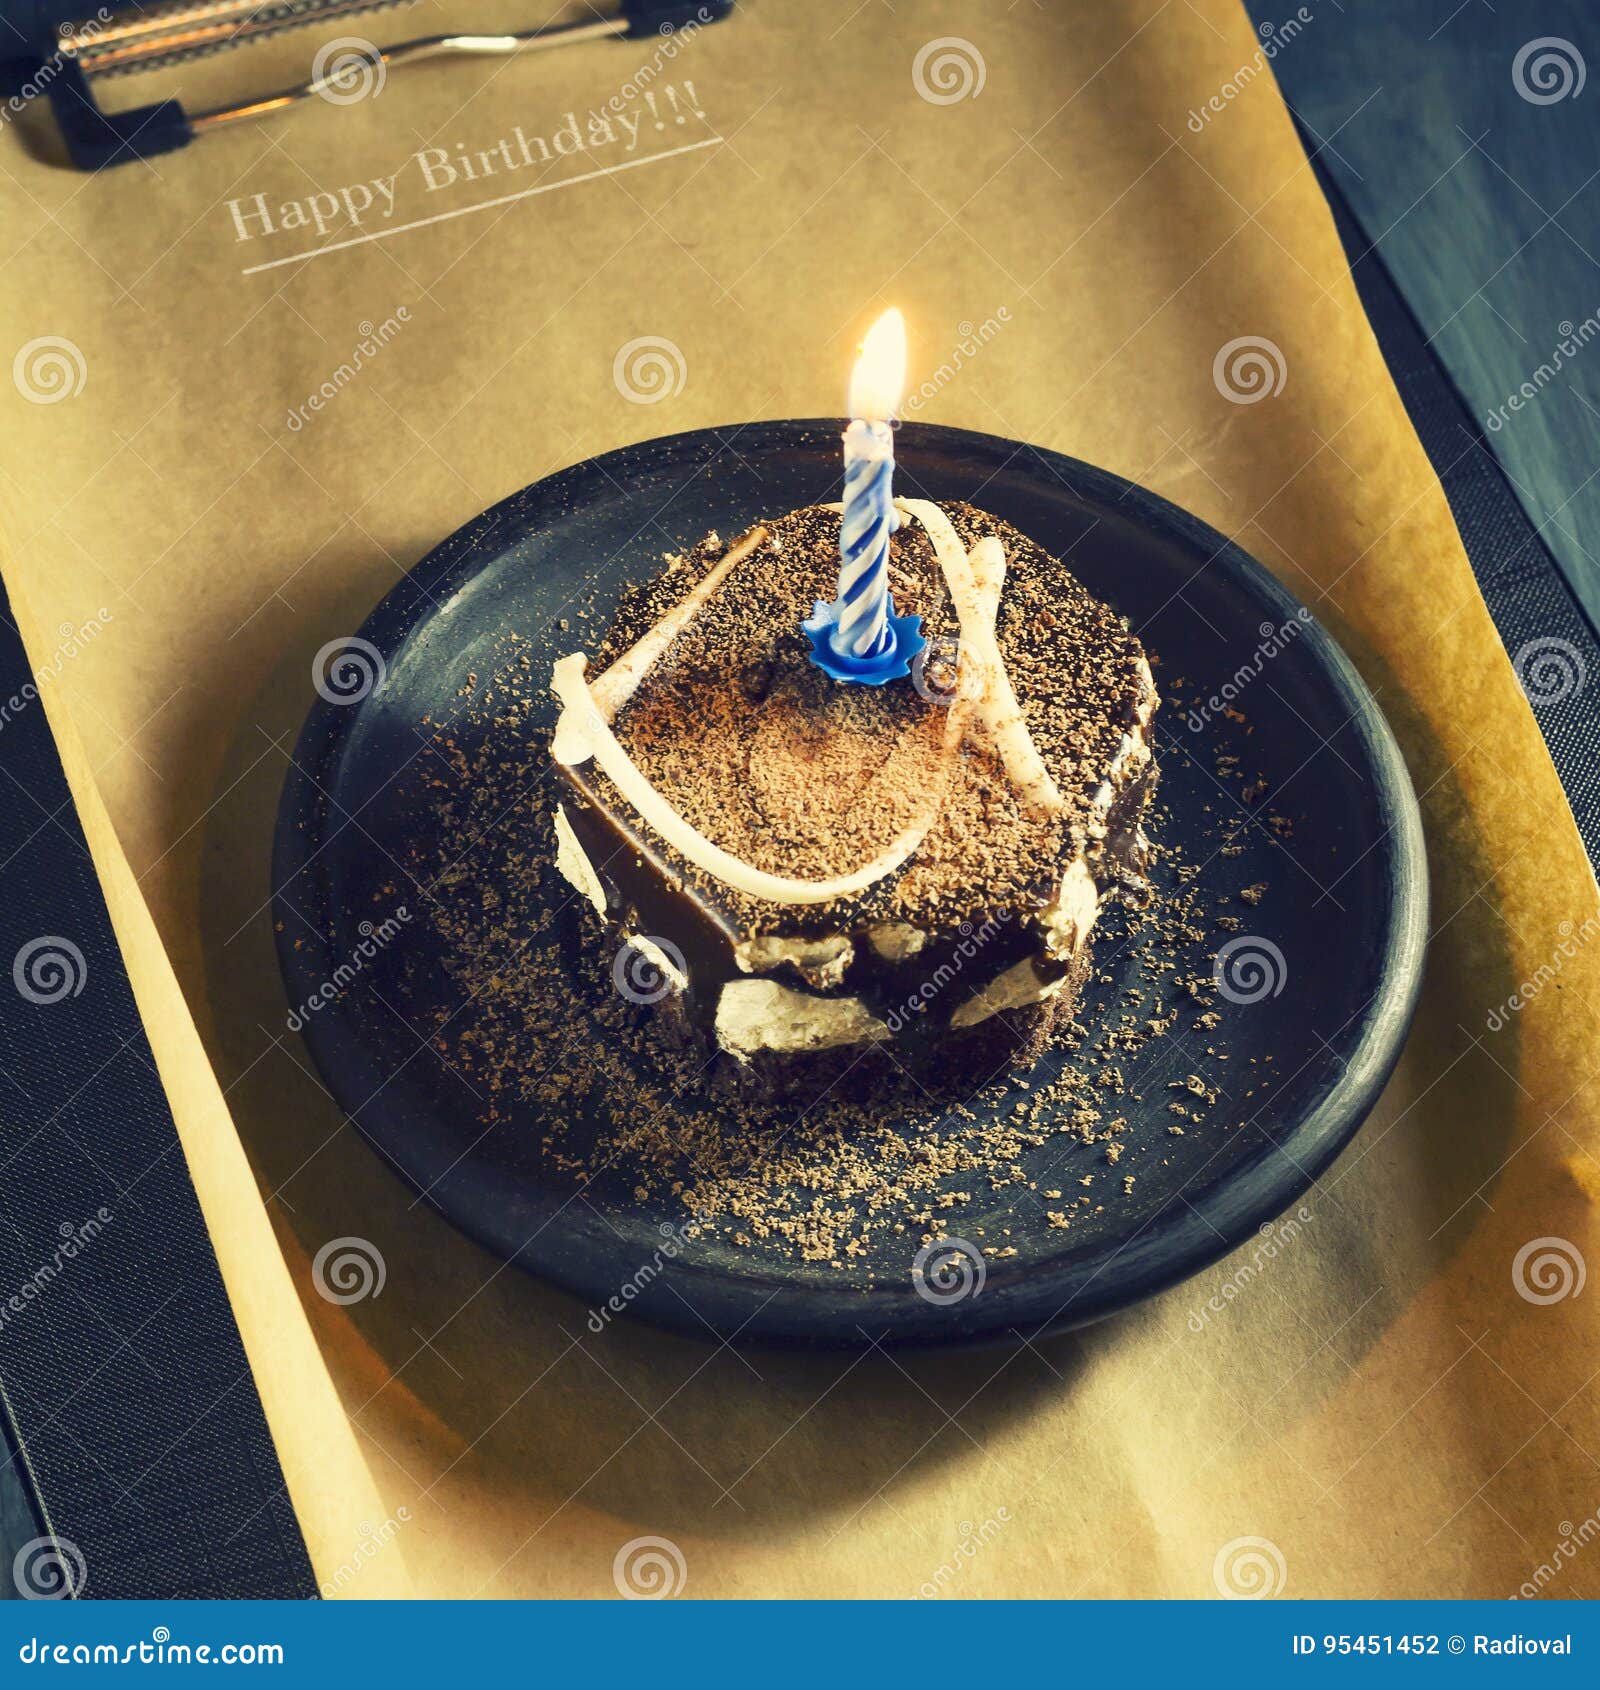 Chocolate Cake With A Candle And Gifts.Happy Birthday, Card. Holidays ...